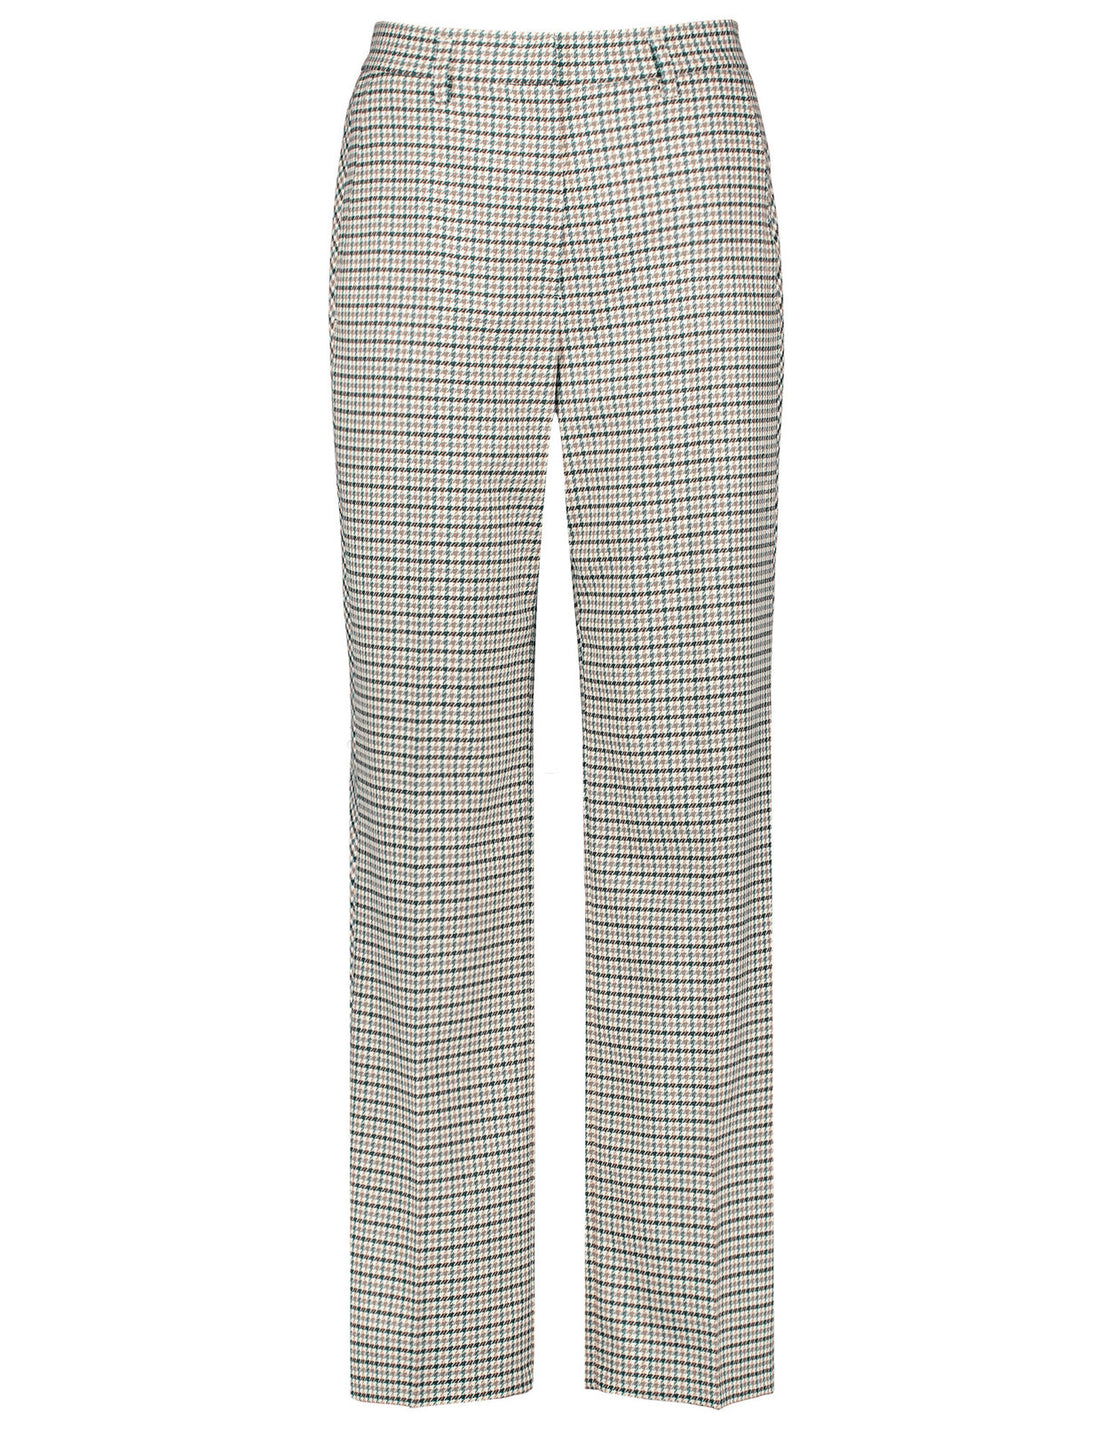 Chic Cloth Trousers With A Wide Leg_220046-31327_9055_02